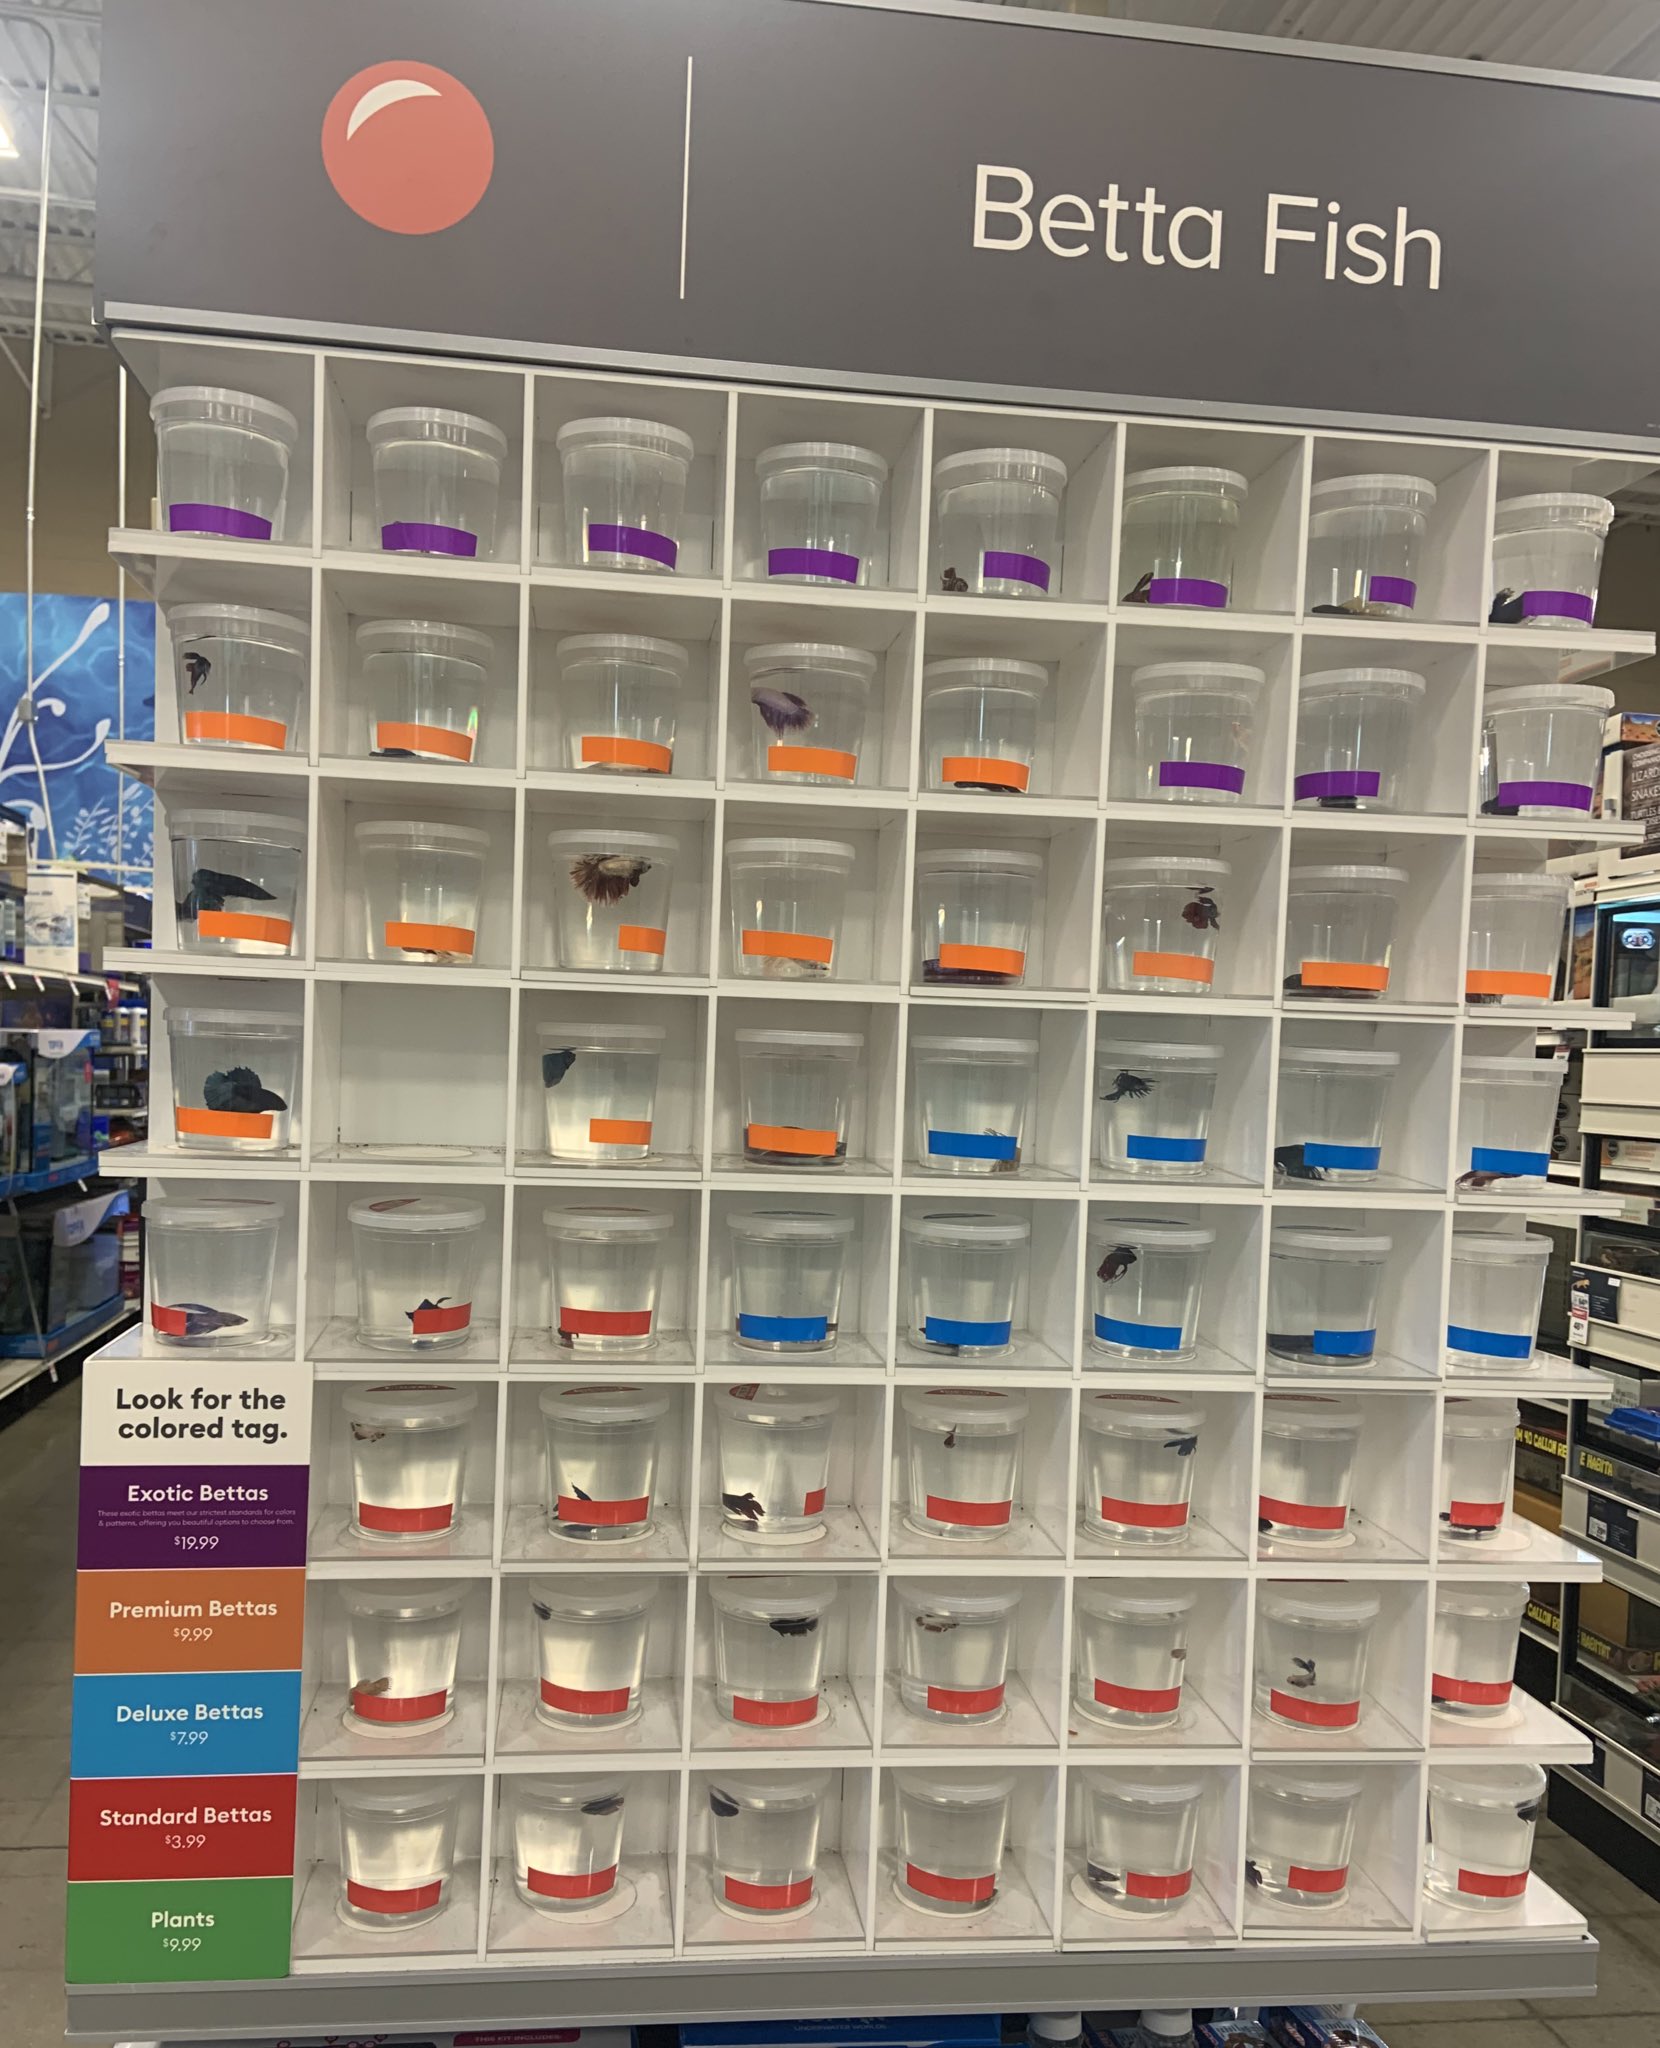 Anna Krivolapova on X: They modernized the betta fish section and made it  even more Huxleian, white honeycomb dividers and a caste system,  exotic-premium-deluxe-standard  / X